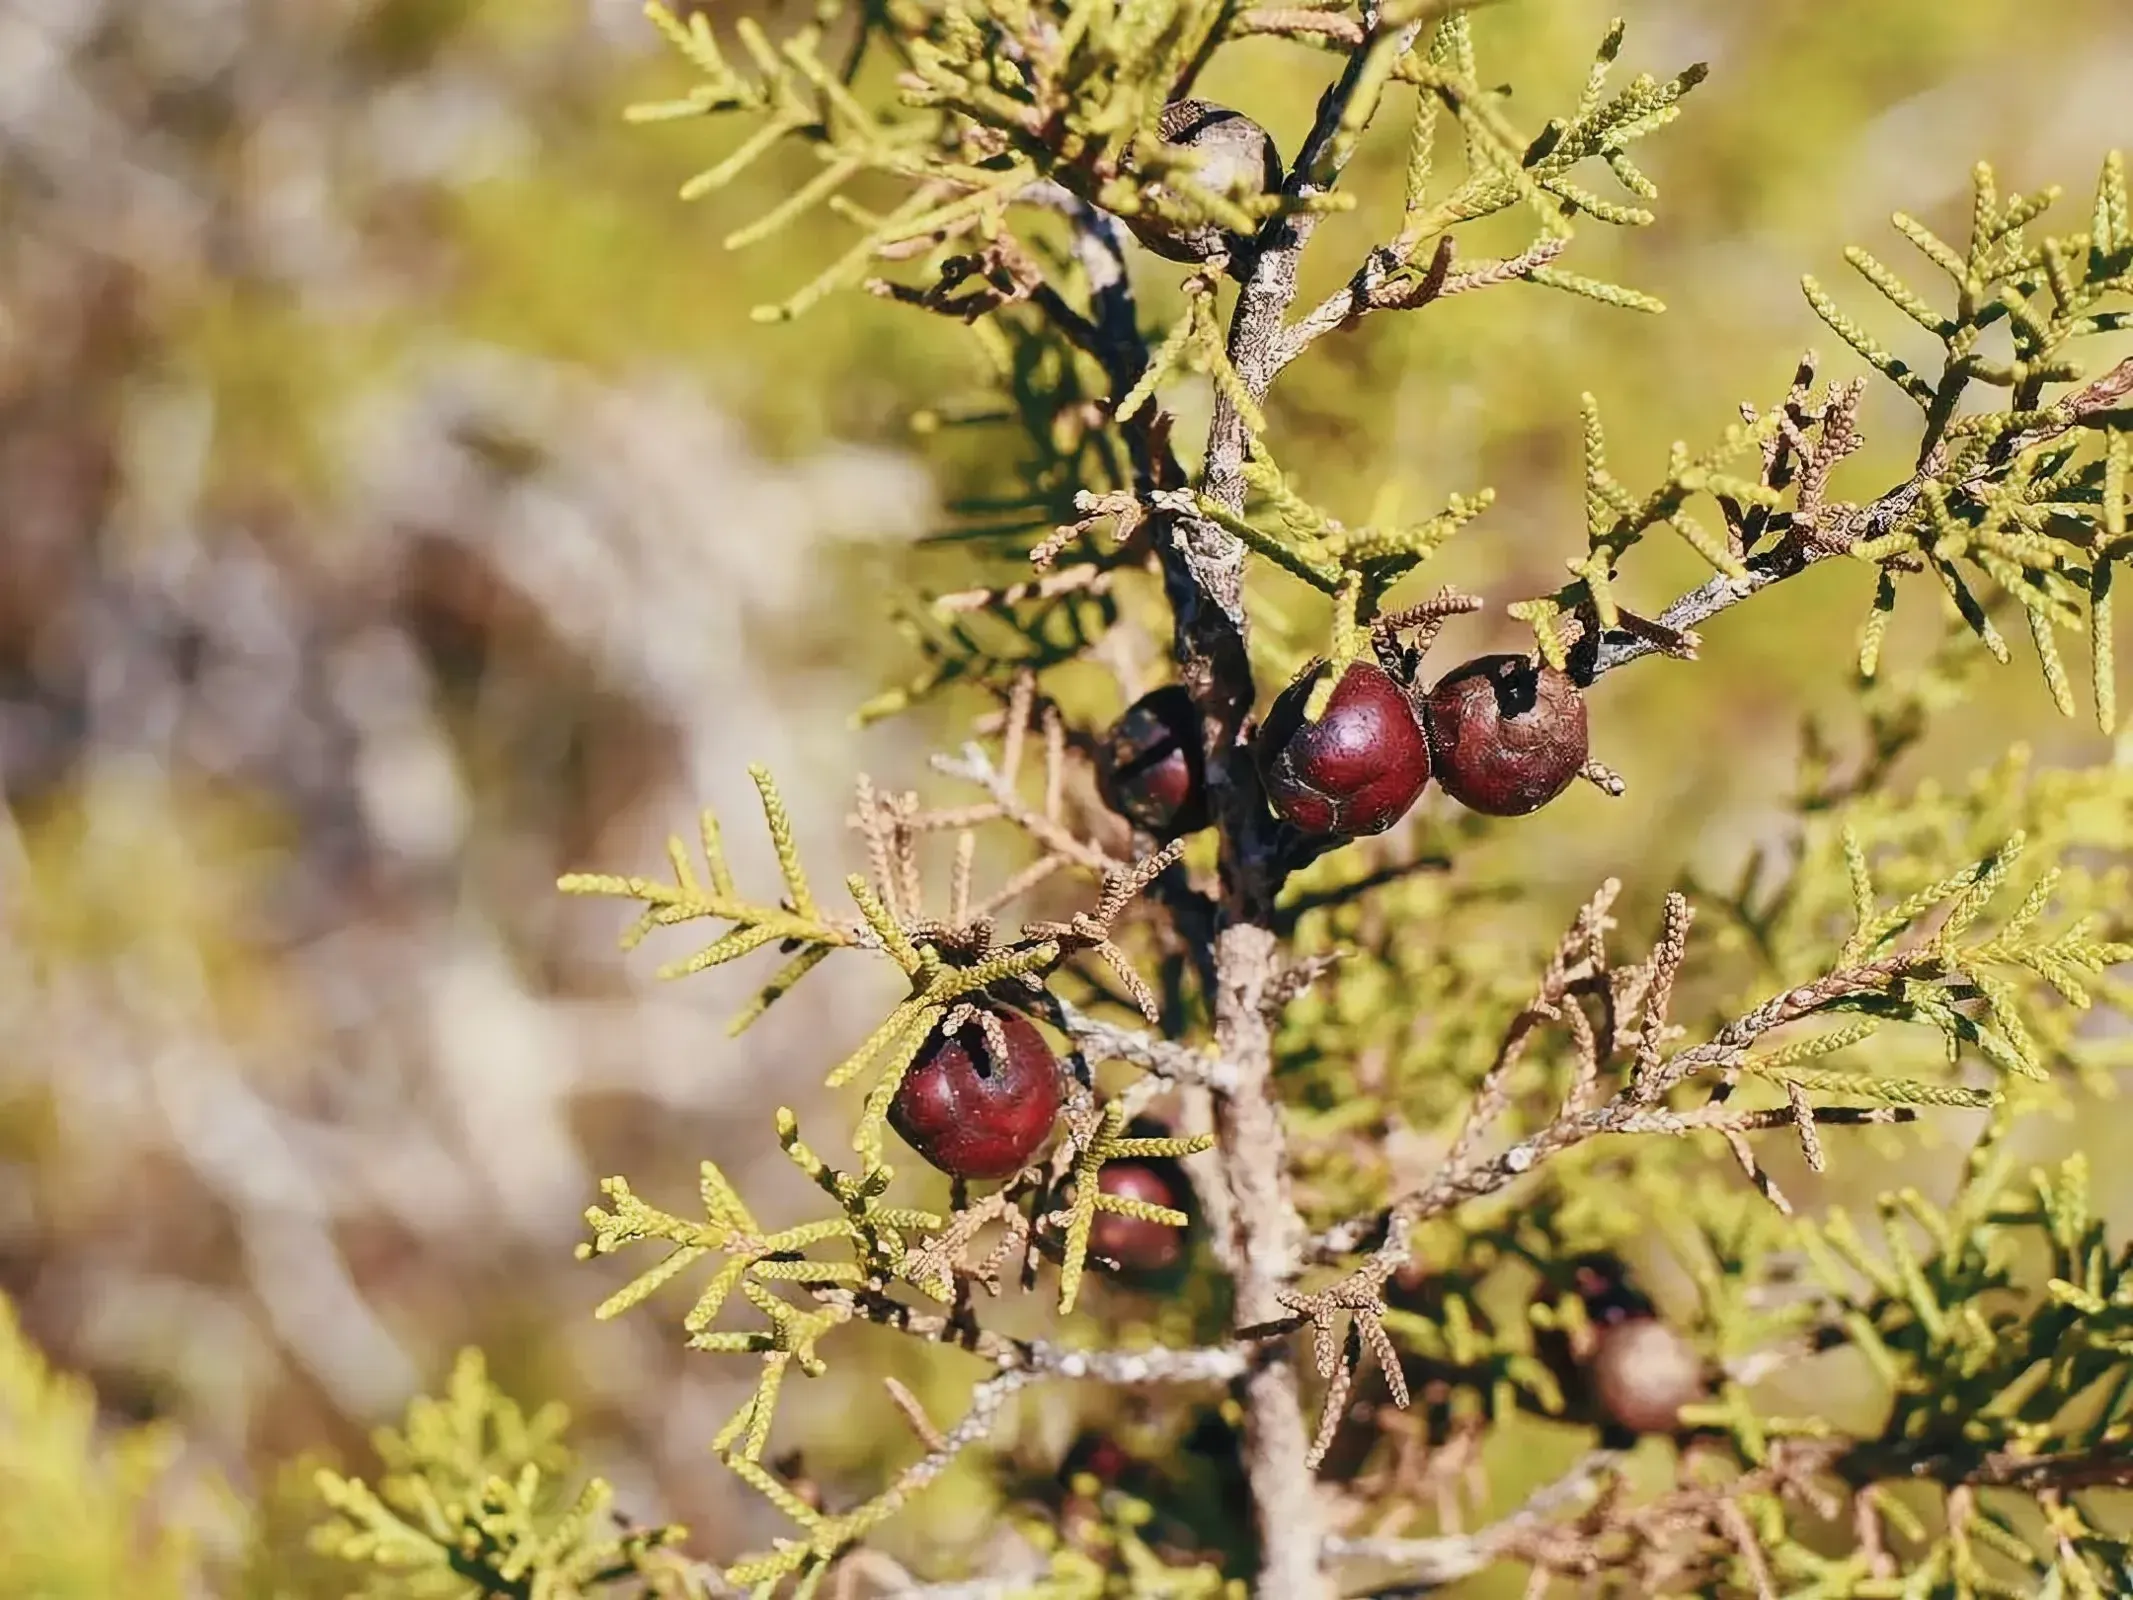 Fruit-bearing tree in the natural beauty of Akamas National Park.